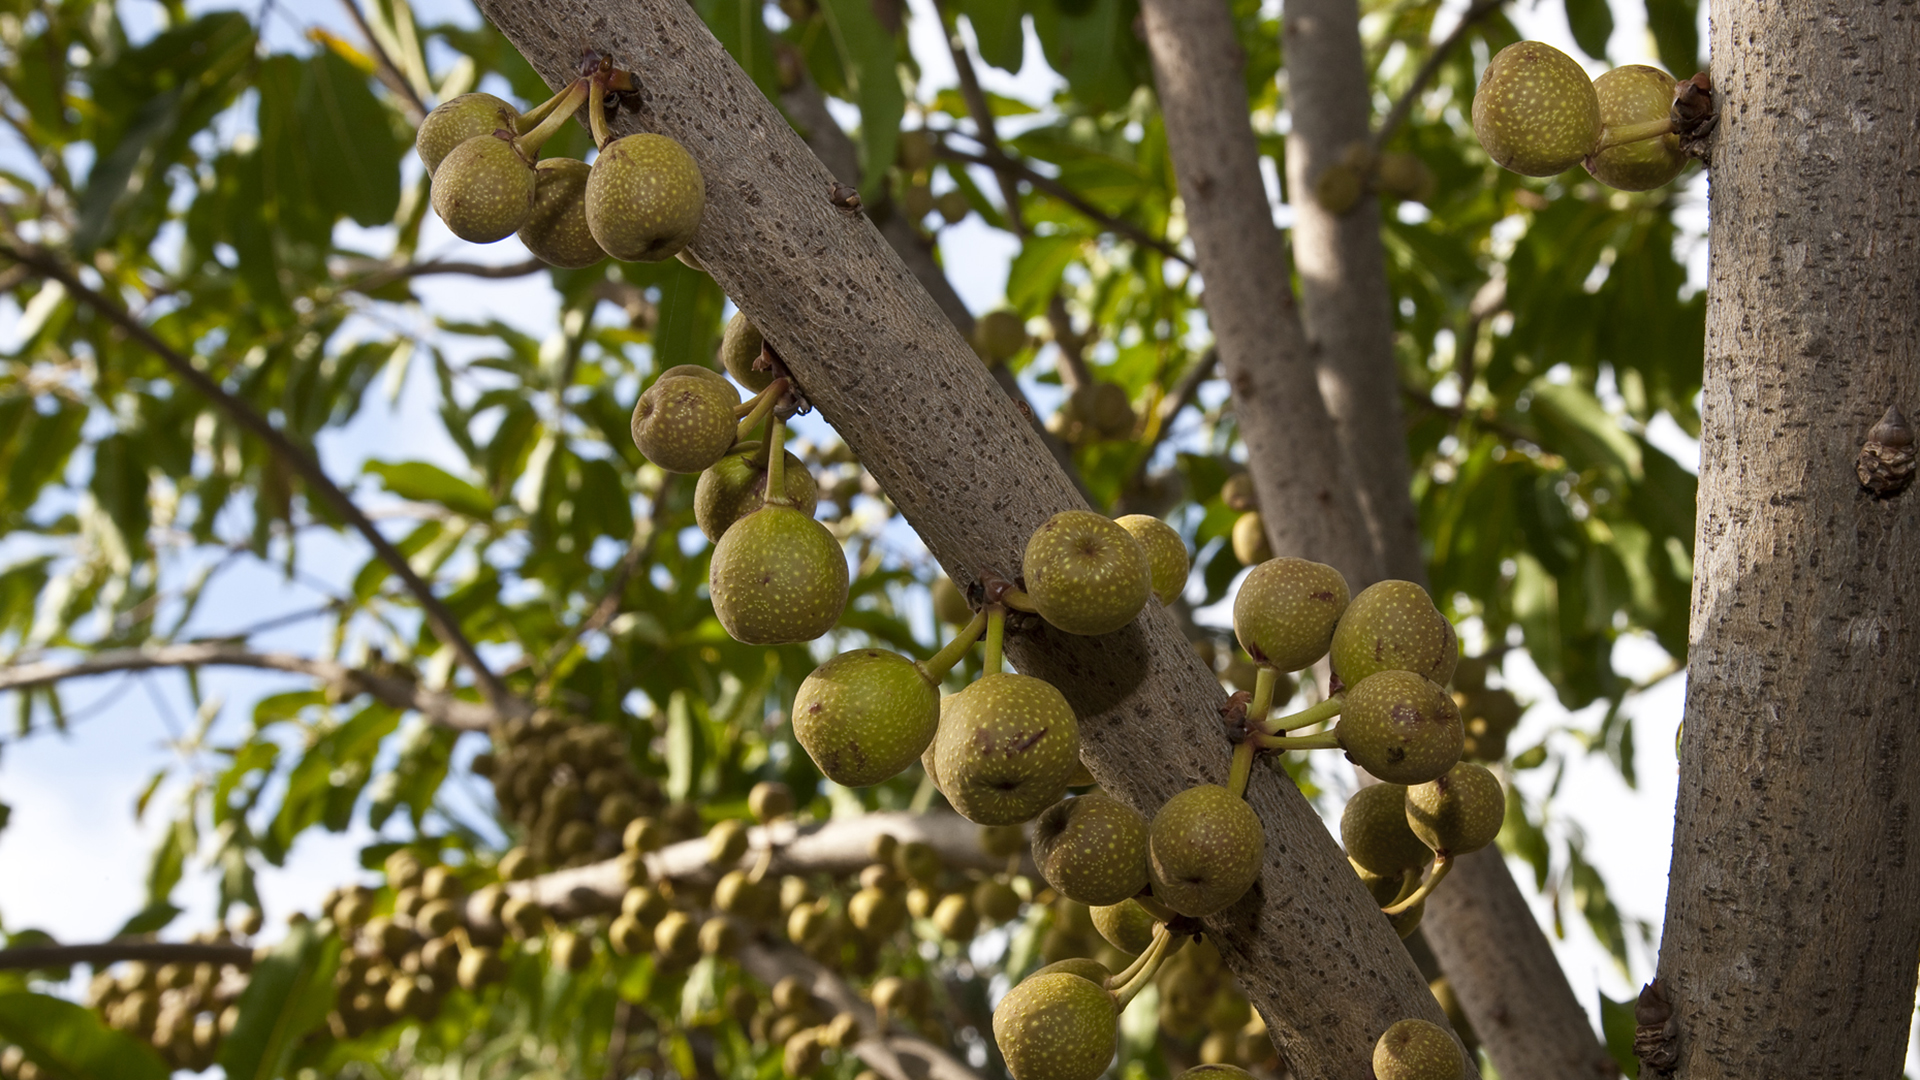 Many figs are shown hanging on a ficus tree.